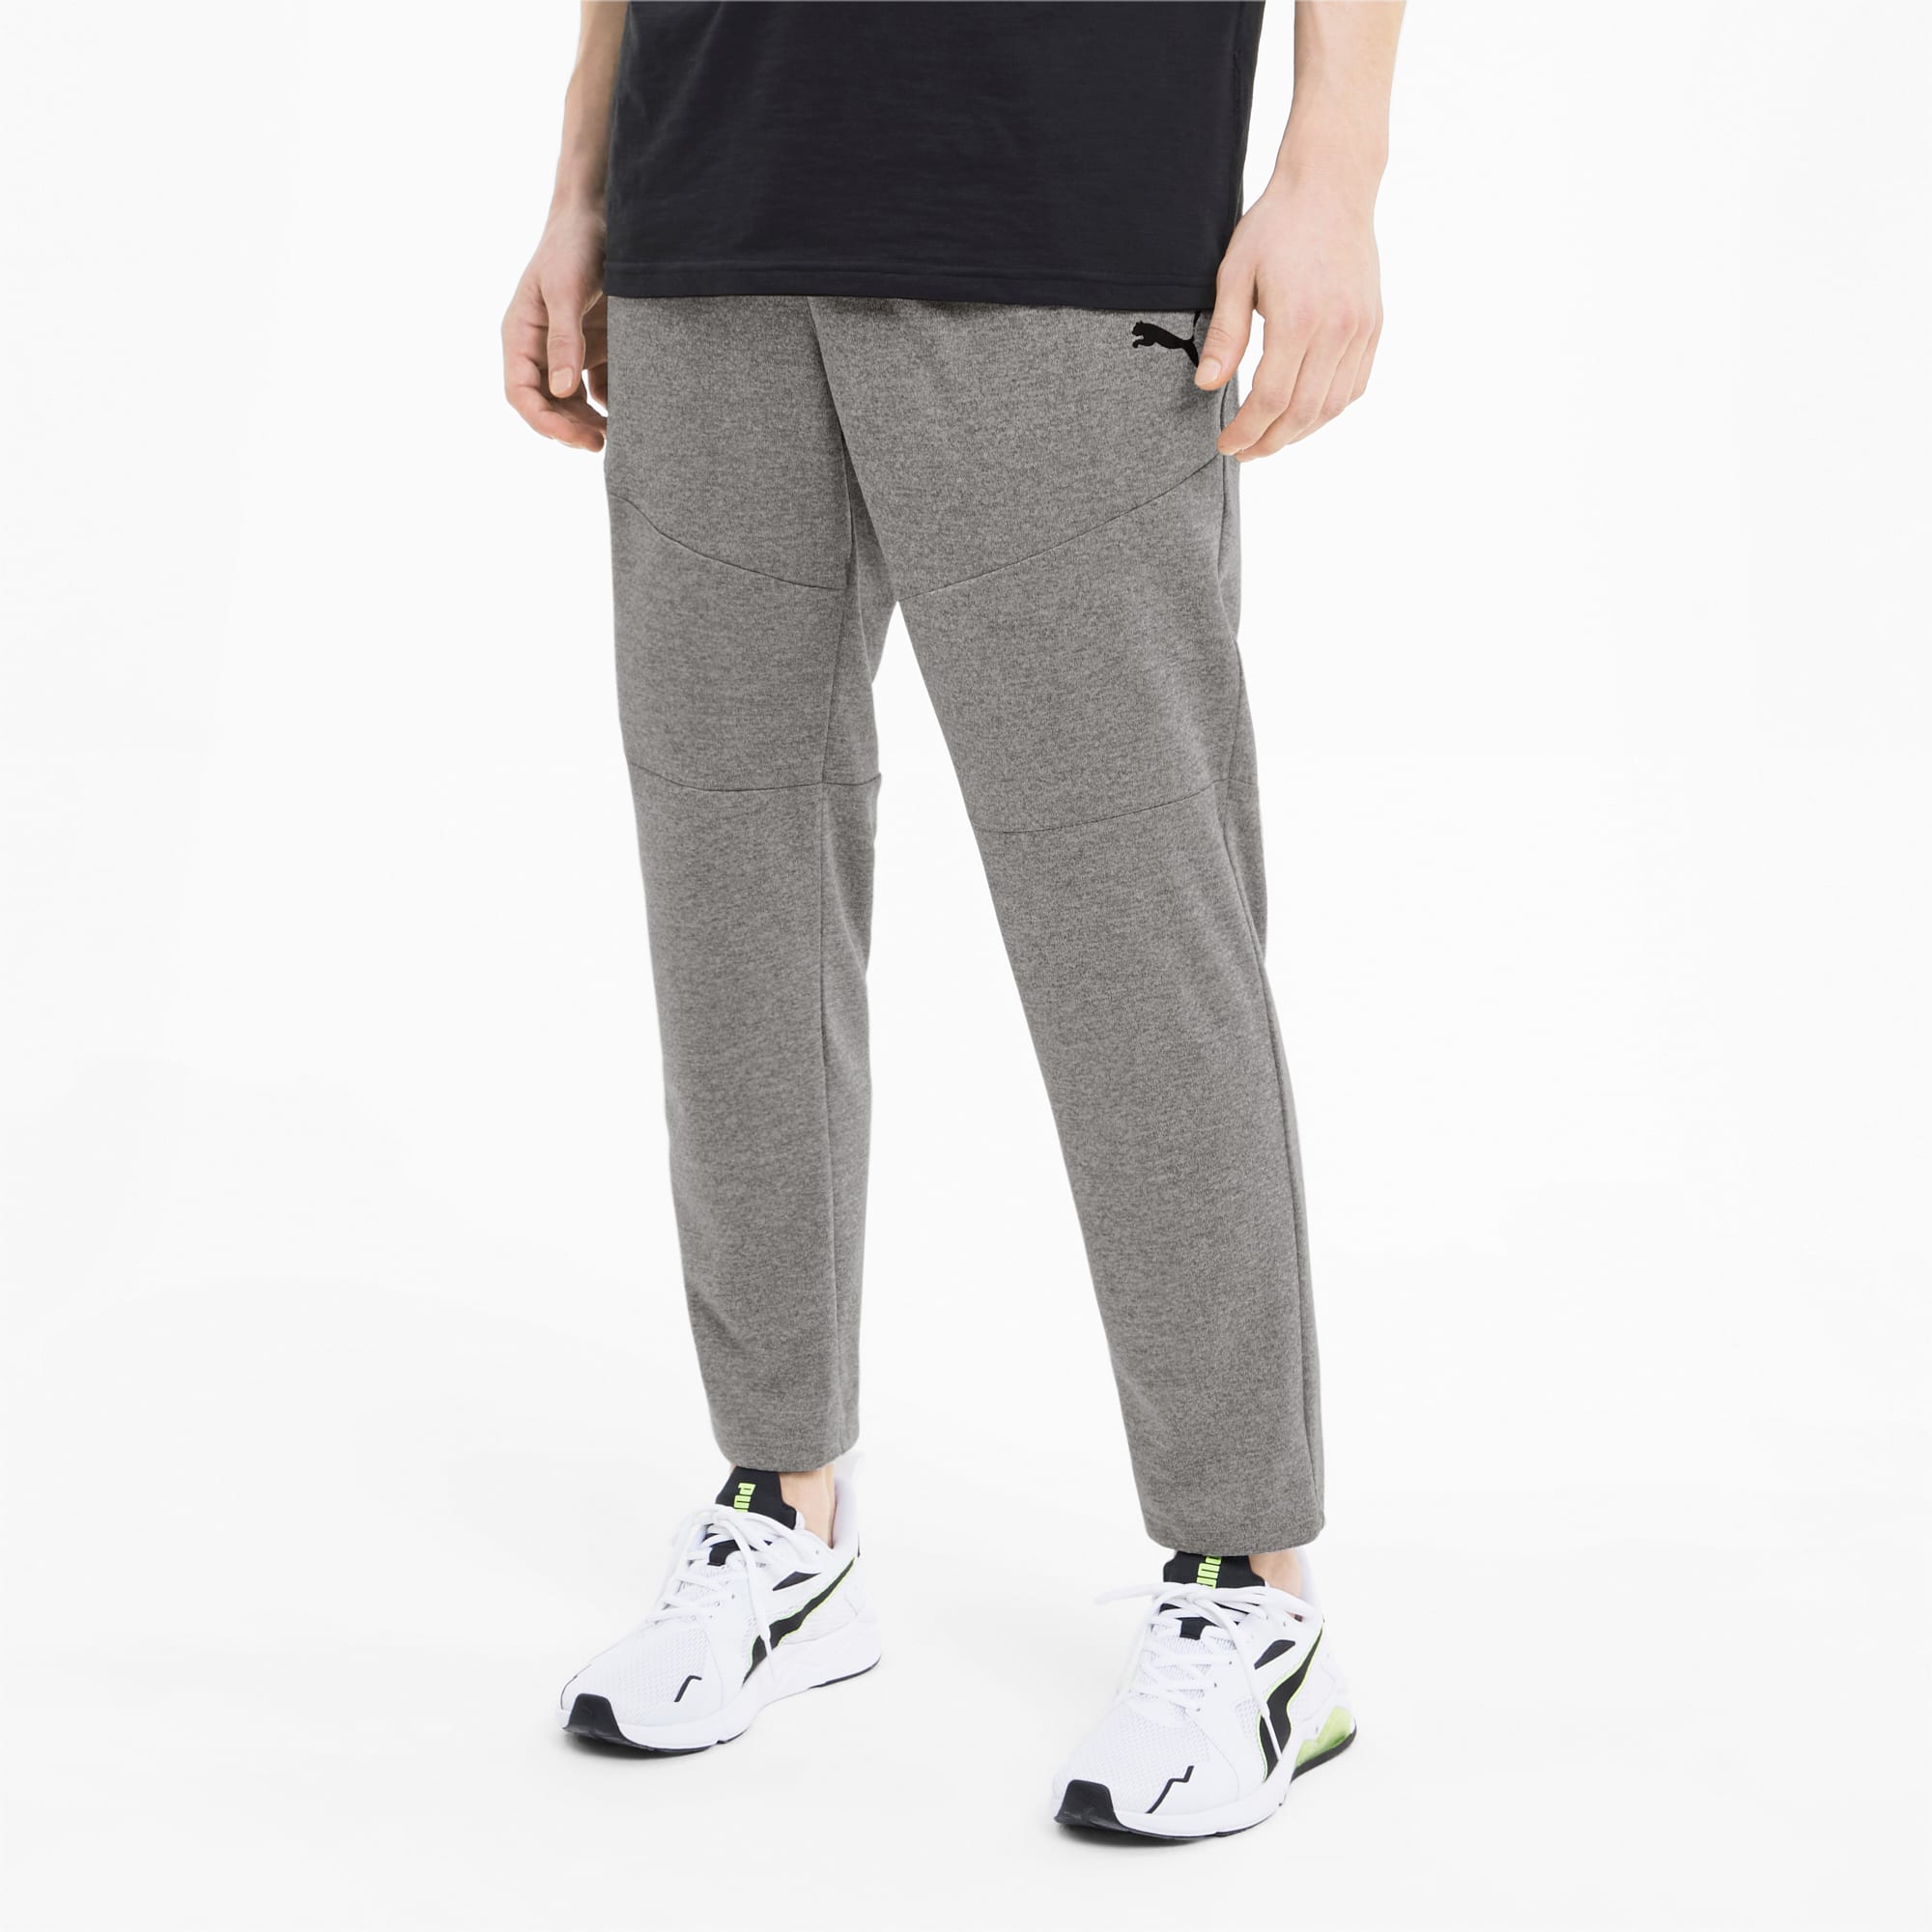 tapered pants mens